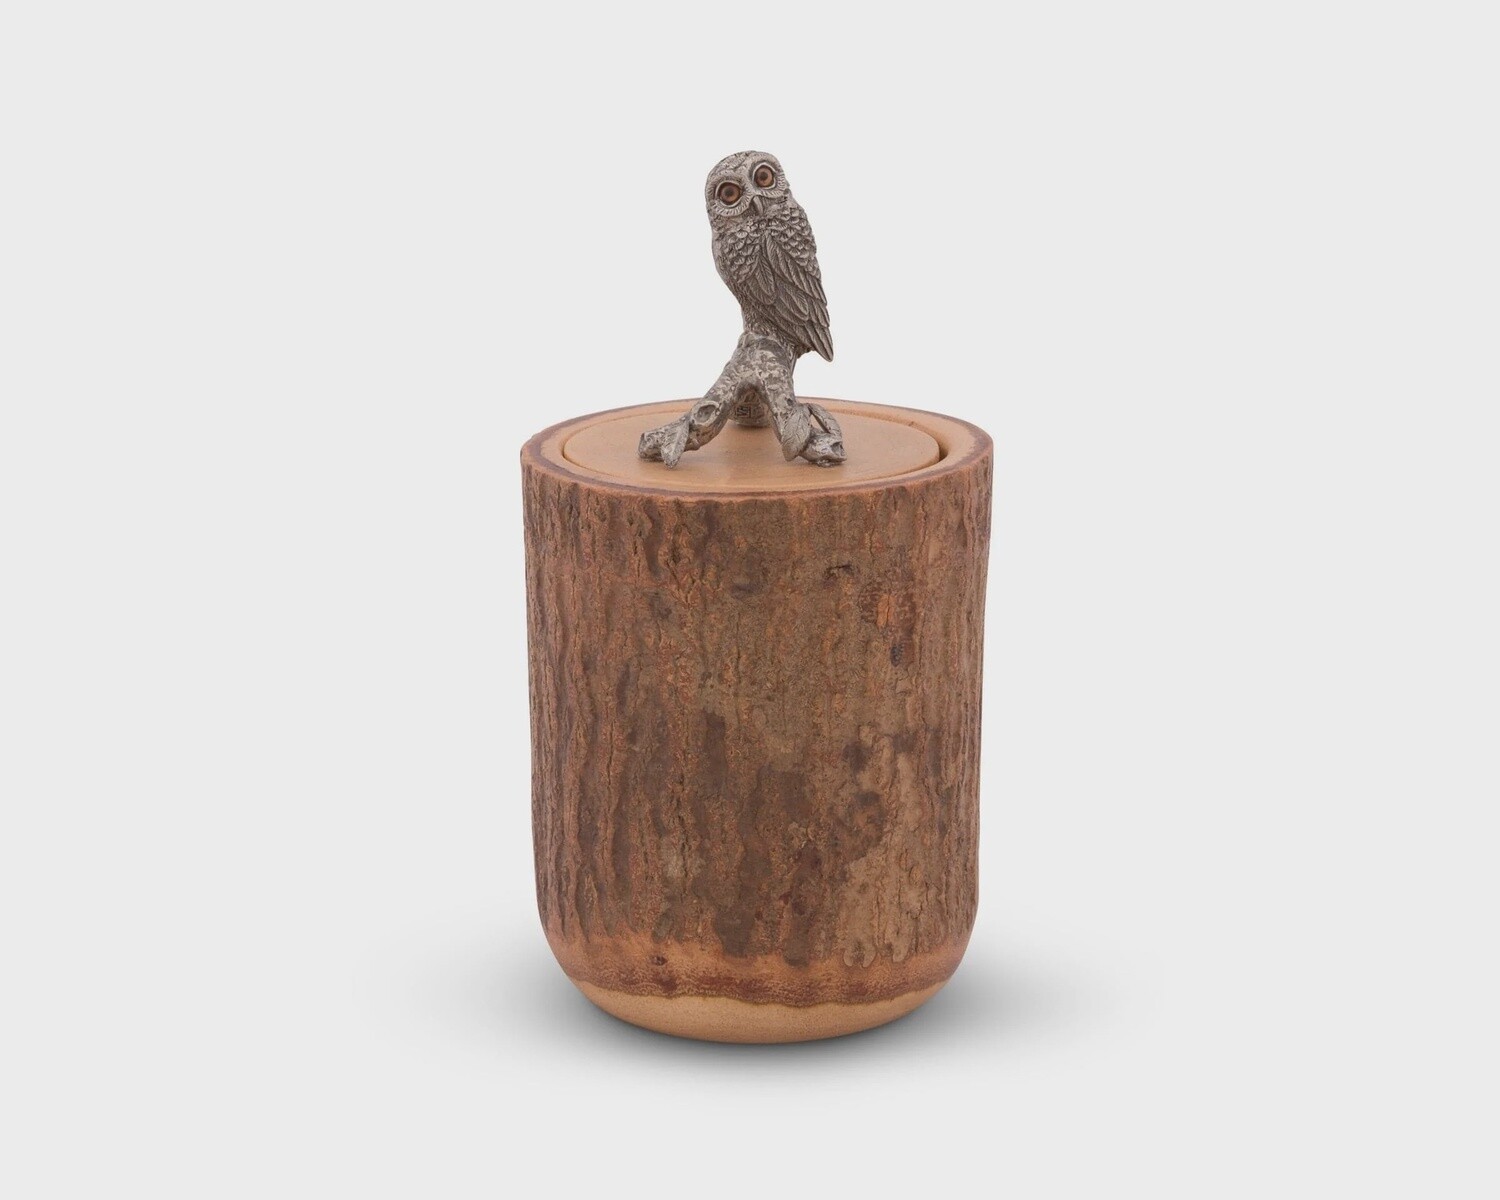 Vagabond House Owl Wood & Pewter Canister